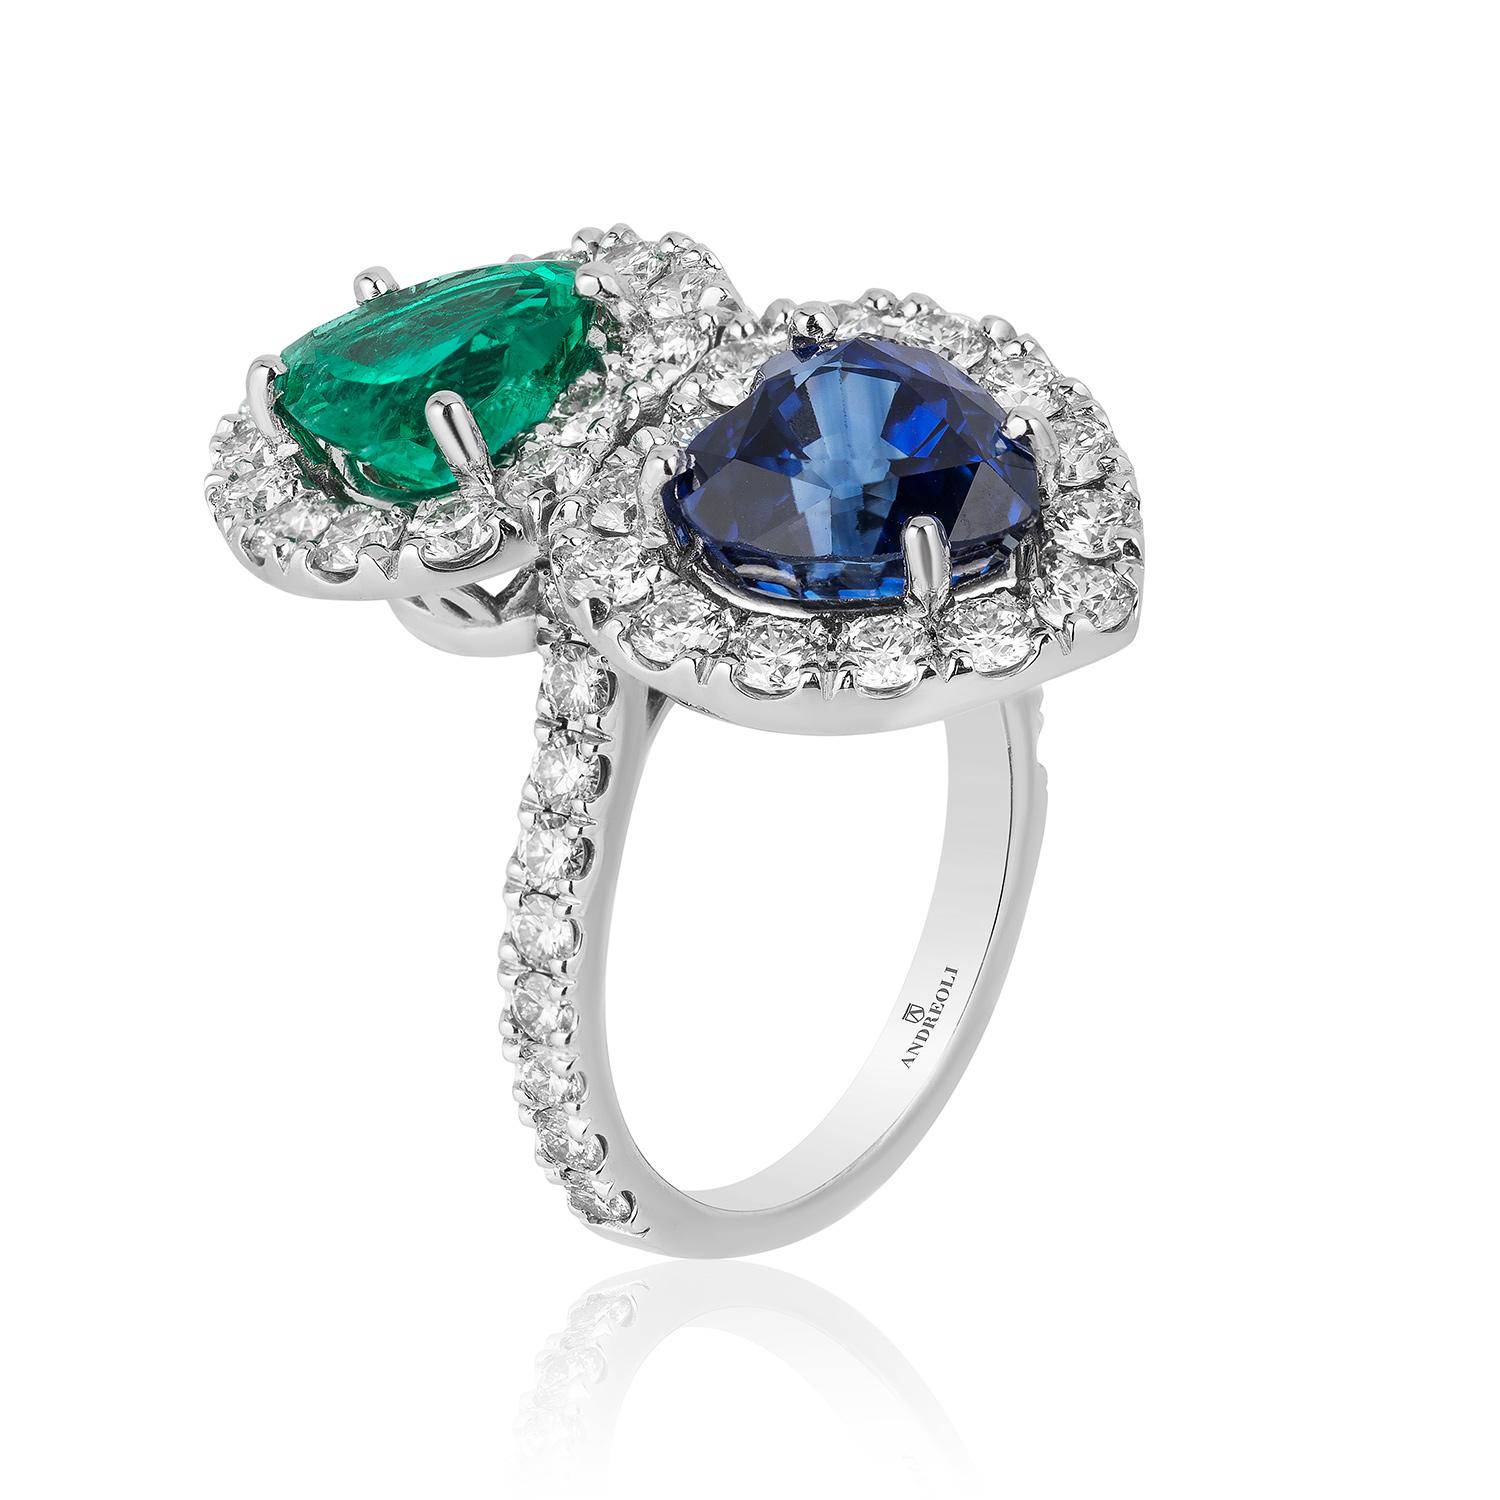 Andreoli Certified Emerald Colombian Sapphire Ceylon Heart Diamond Platinum Ring. This ring features a 2.05 carat CDC Switzerland report Colombian Emerald, 3.91 carat CDC Switzerland Report Ceylon Sapphire surrounded with 2.11 carats of F-G-H Color